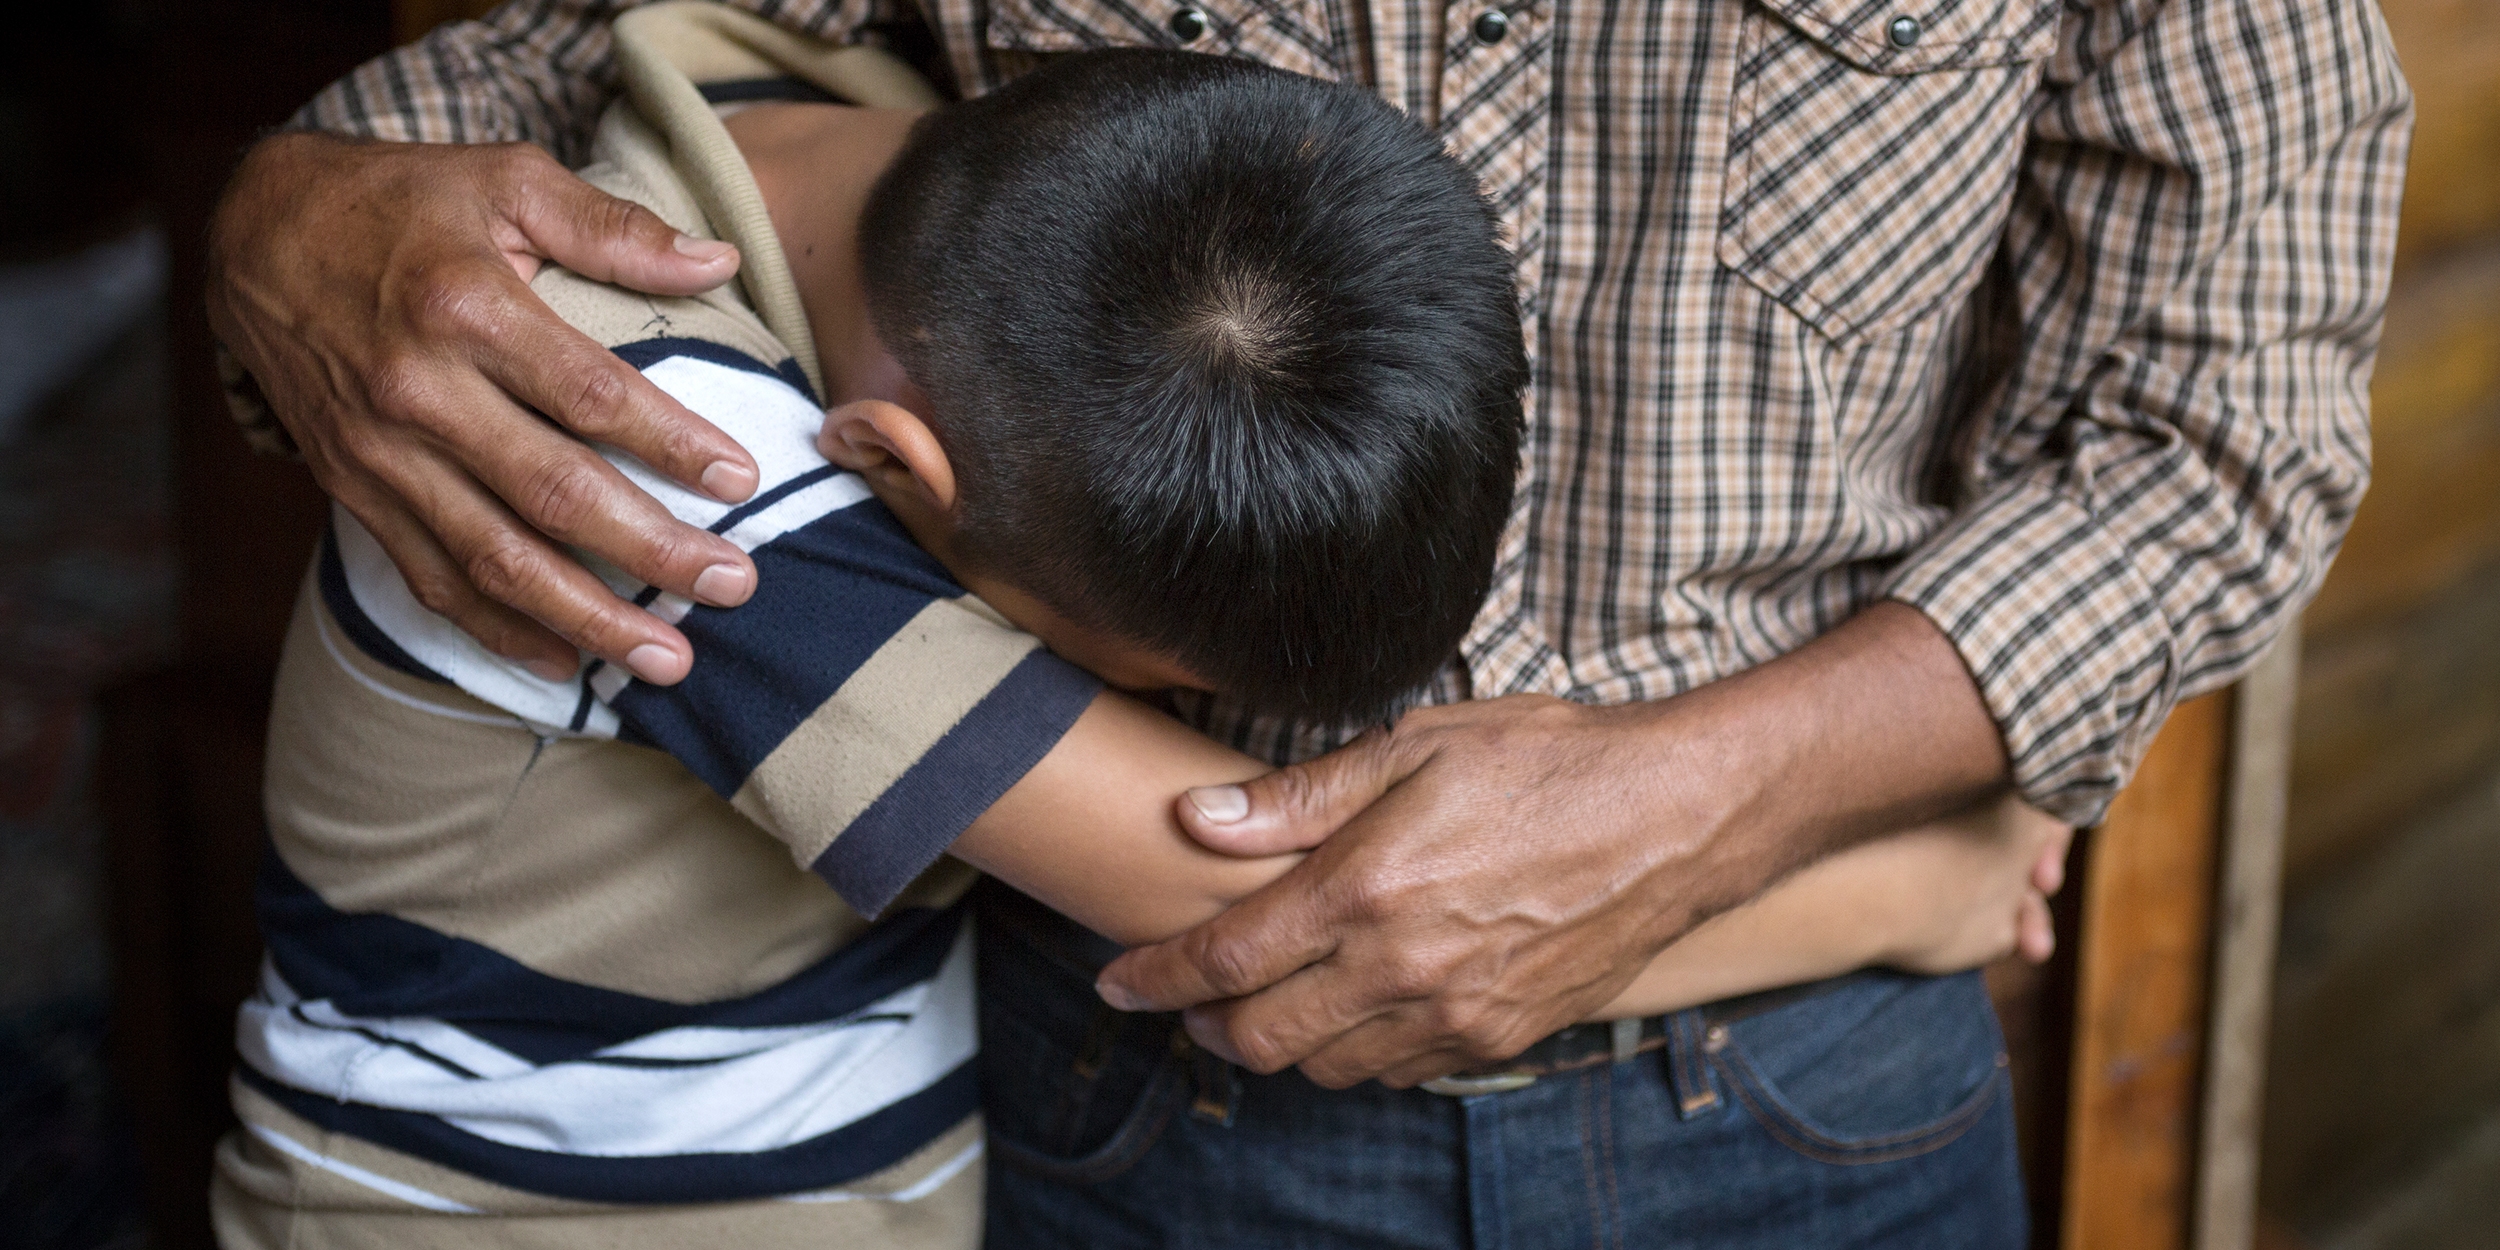 An El Salvadorian father comforts his 12-year old son. The boy lost his older brother to gang violence and the family cannot return home as a result. Save the Children is gravely concerned about the treatment and well-being of children from Central America and Mexico who are in the custody of the United States government after crossing the U.S.-Mexico border. Photo credit: Tom Pilston / Save the Children, May 2017